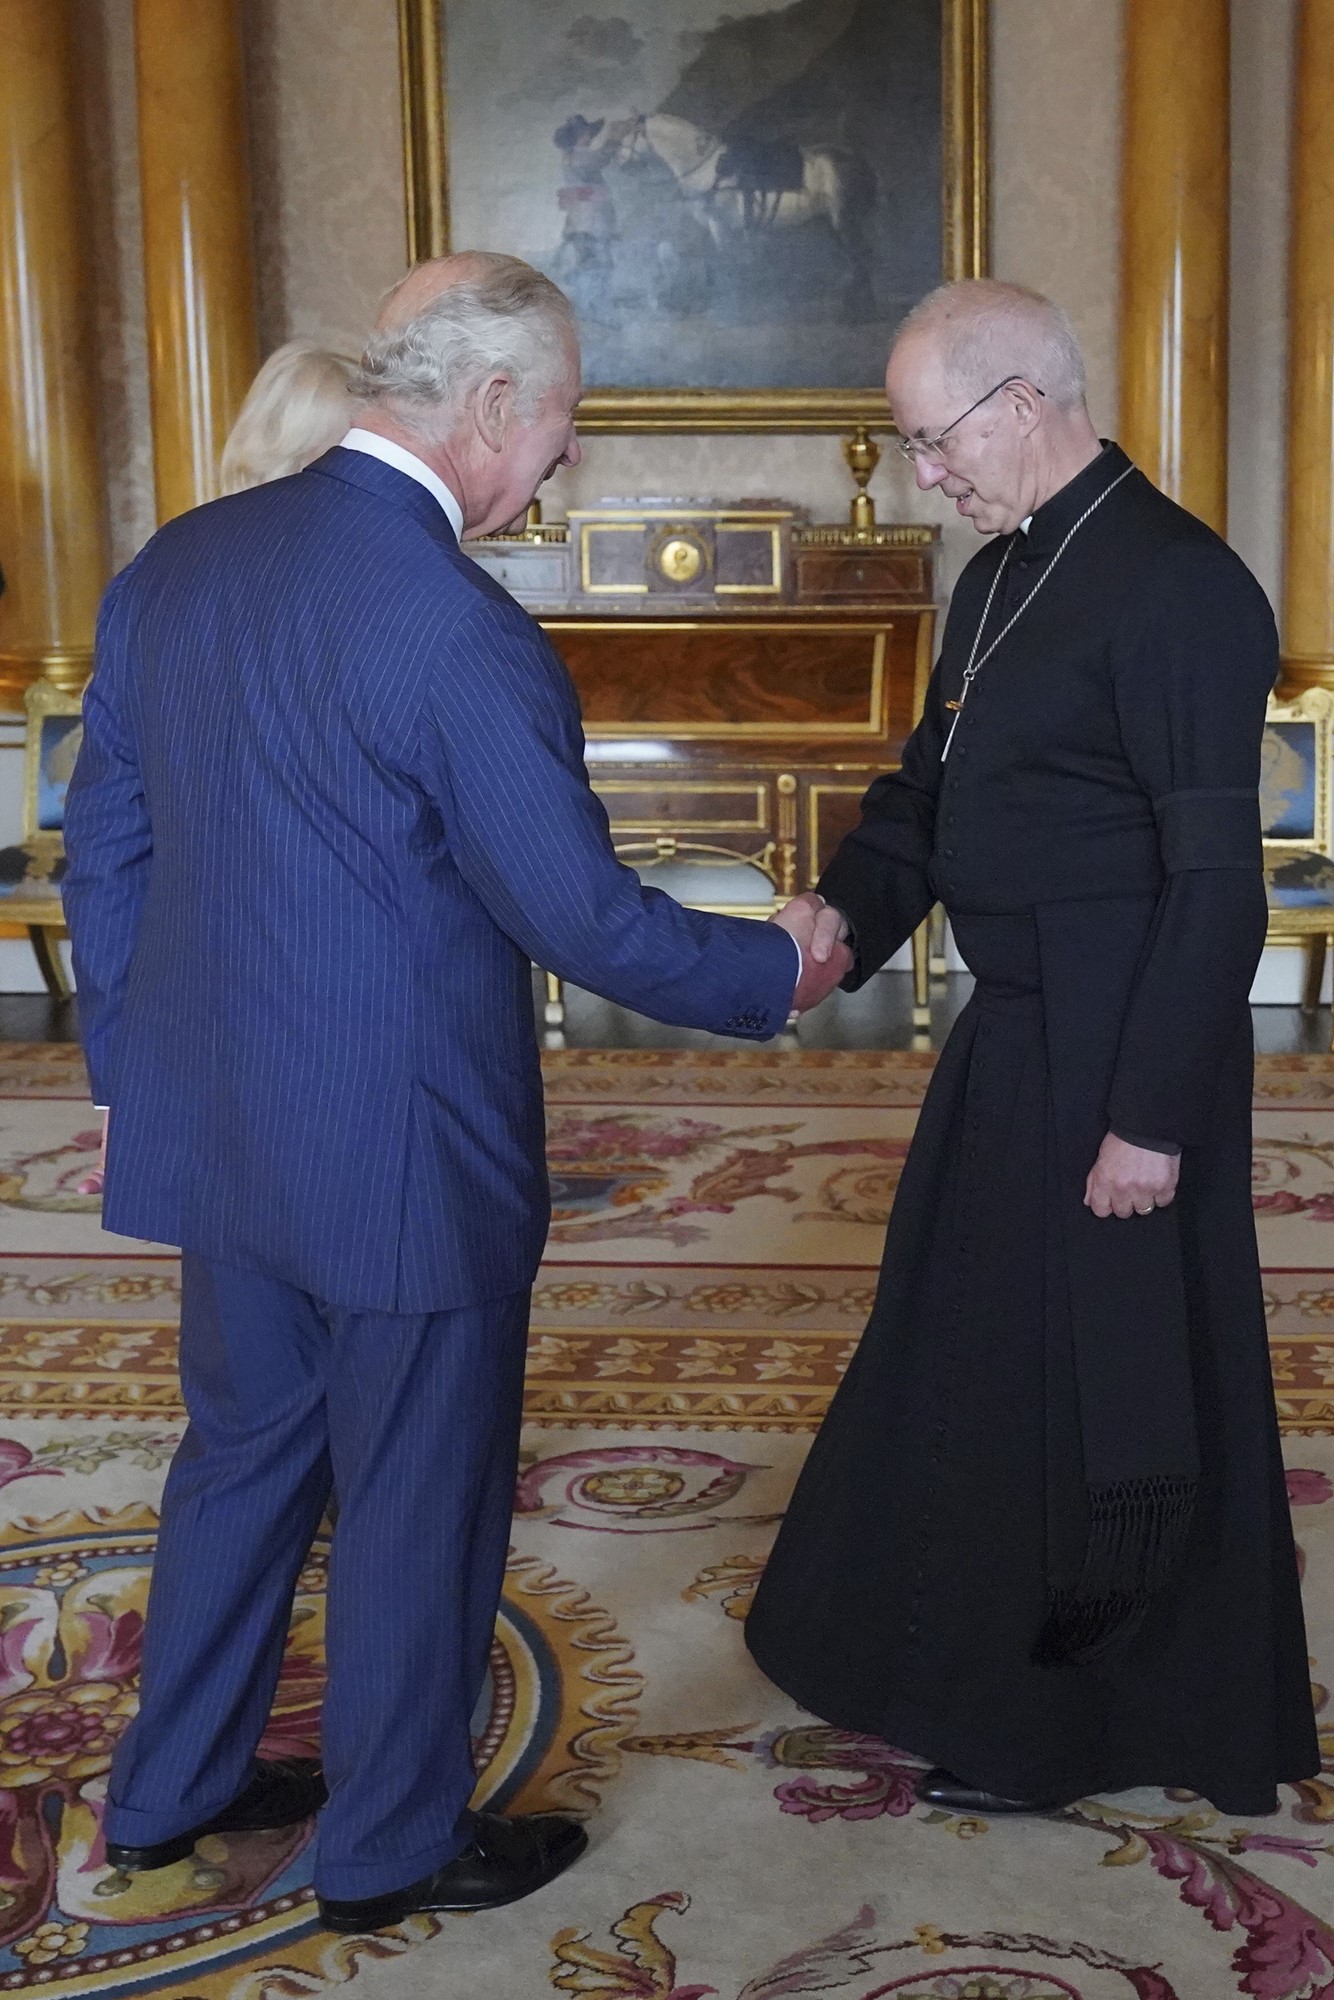 King Charles III shakes hands with the Archbishop of Canterbury